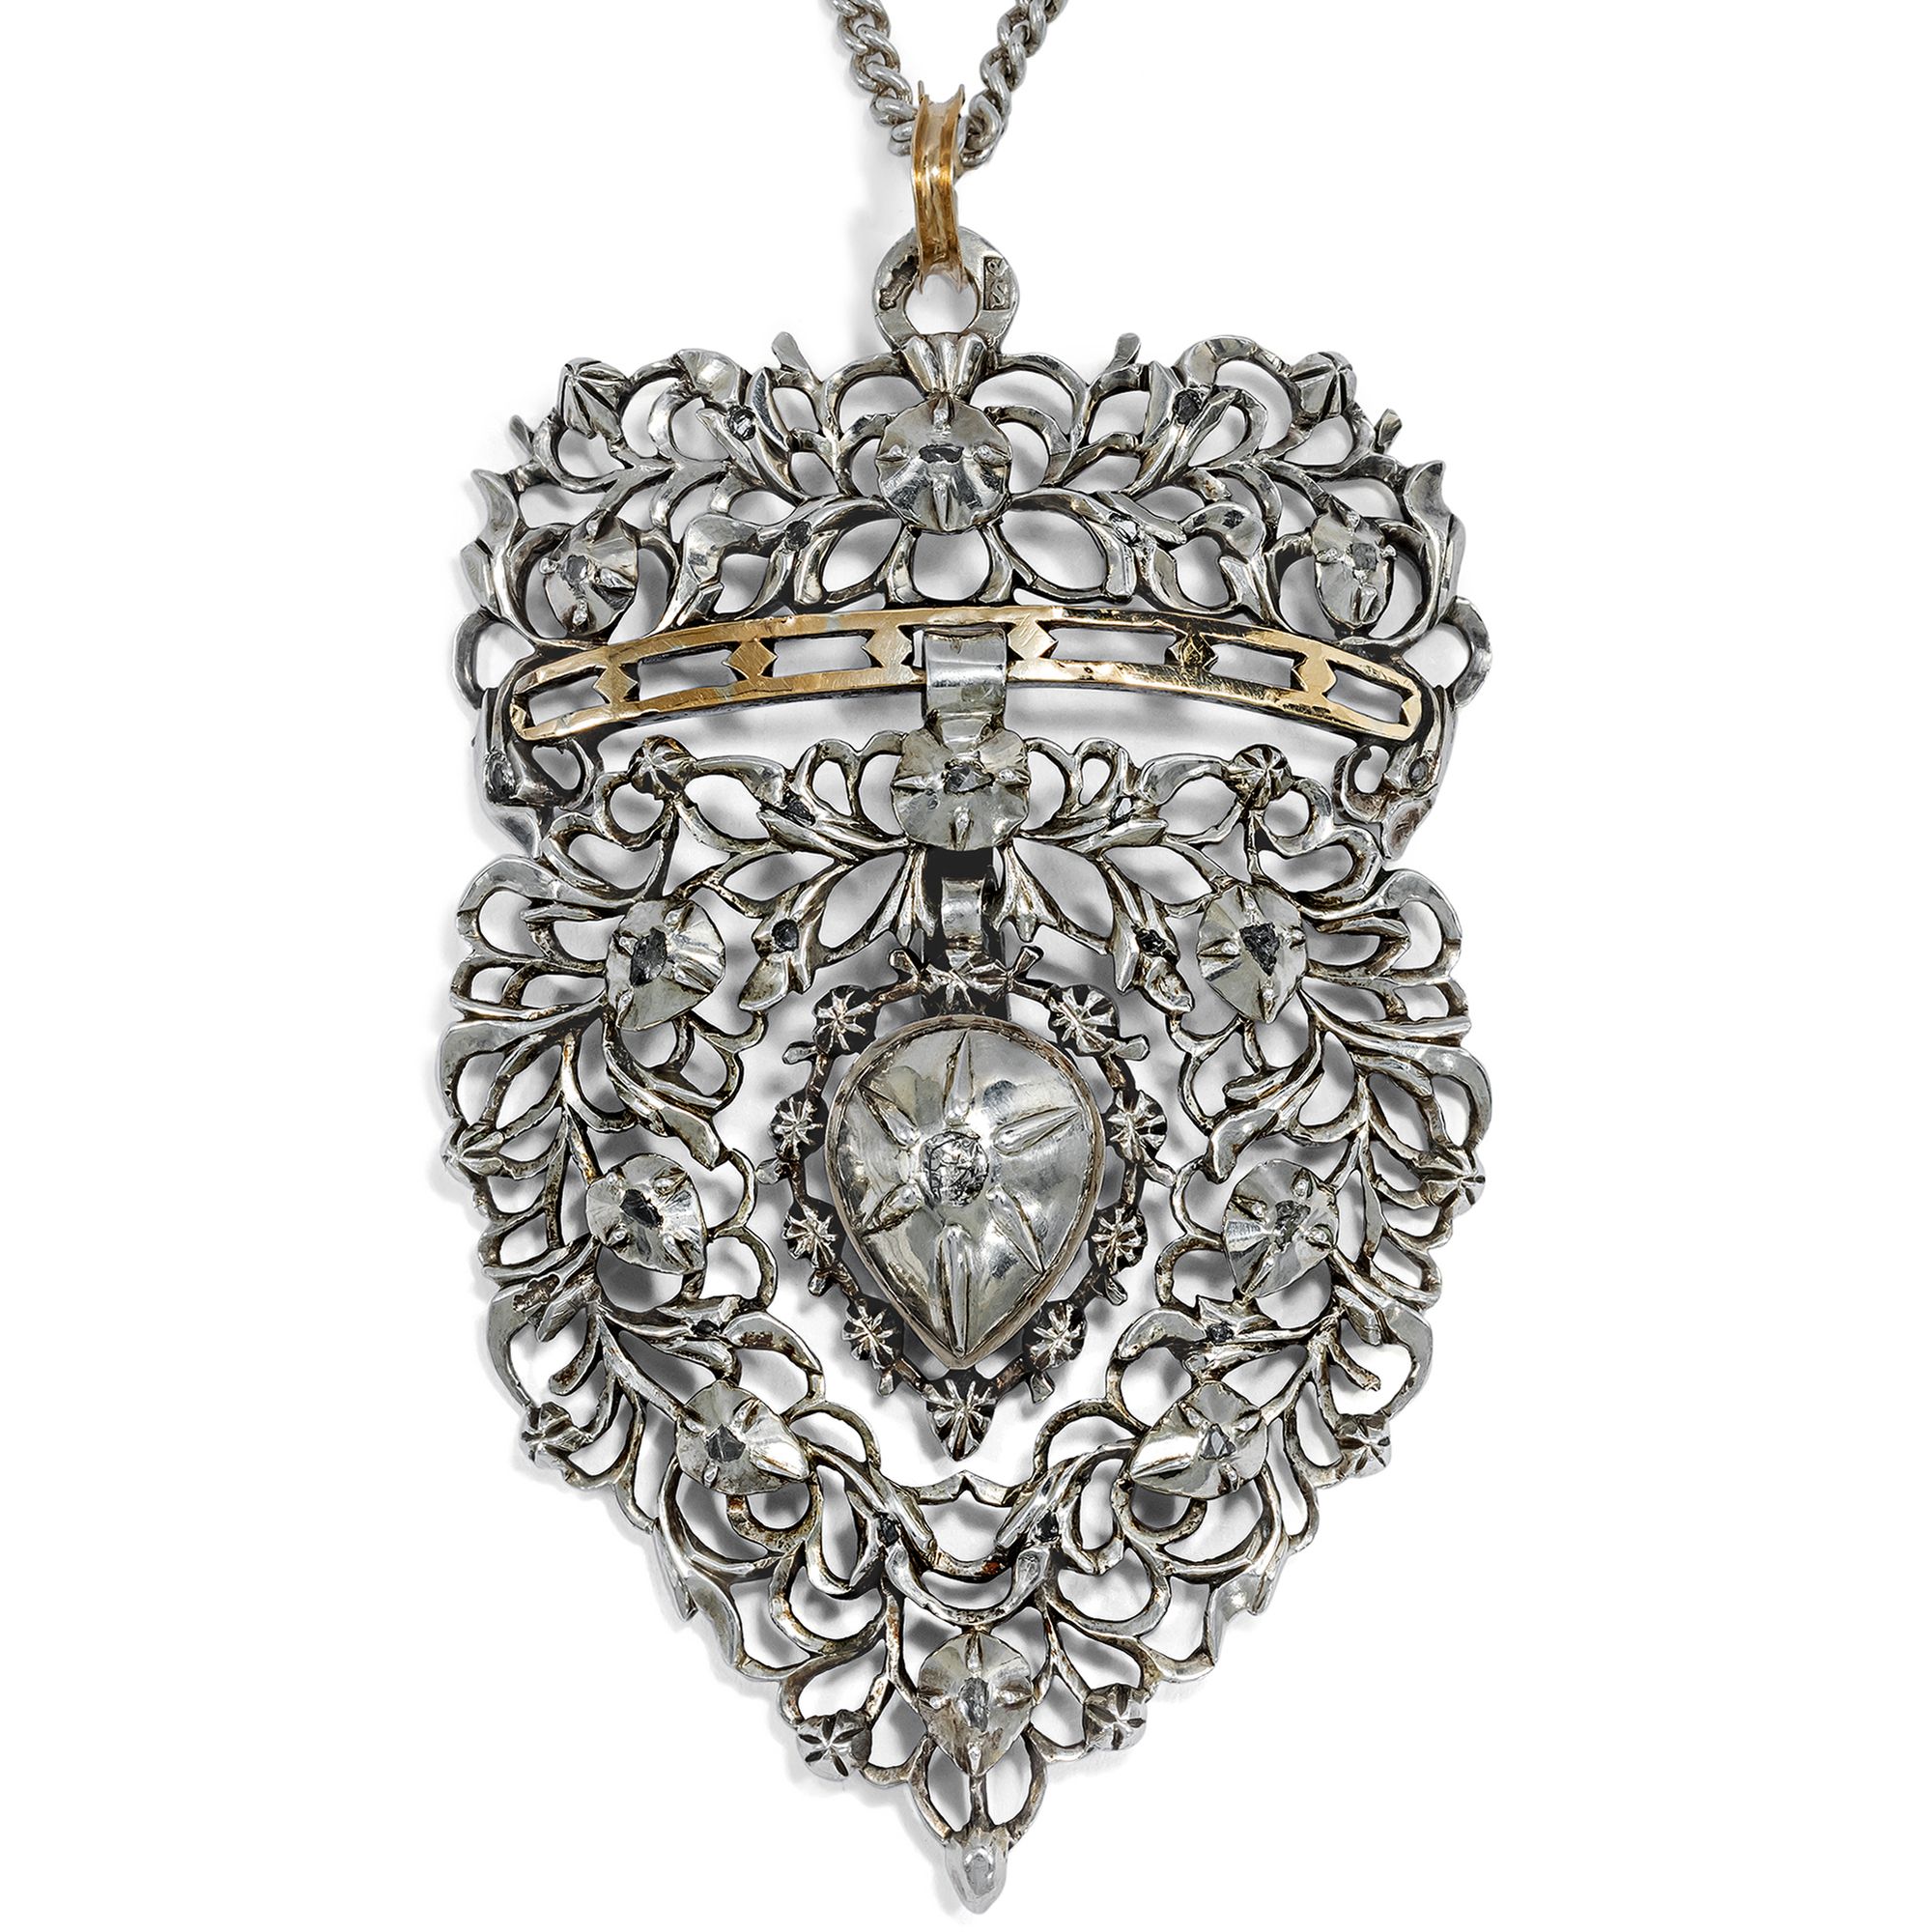 Large Pendant With Diamonds In Silver From Belgium, Circa 1850